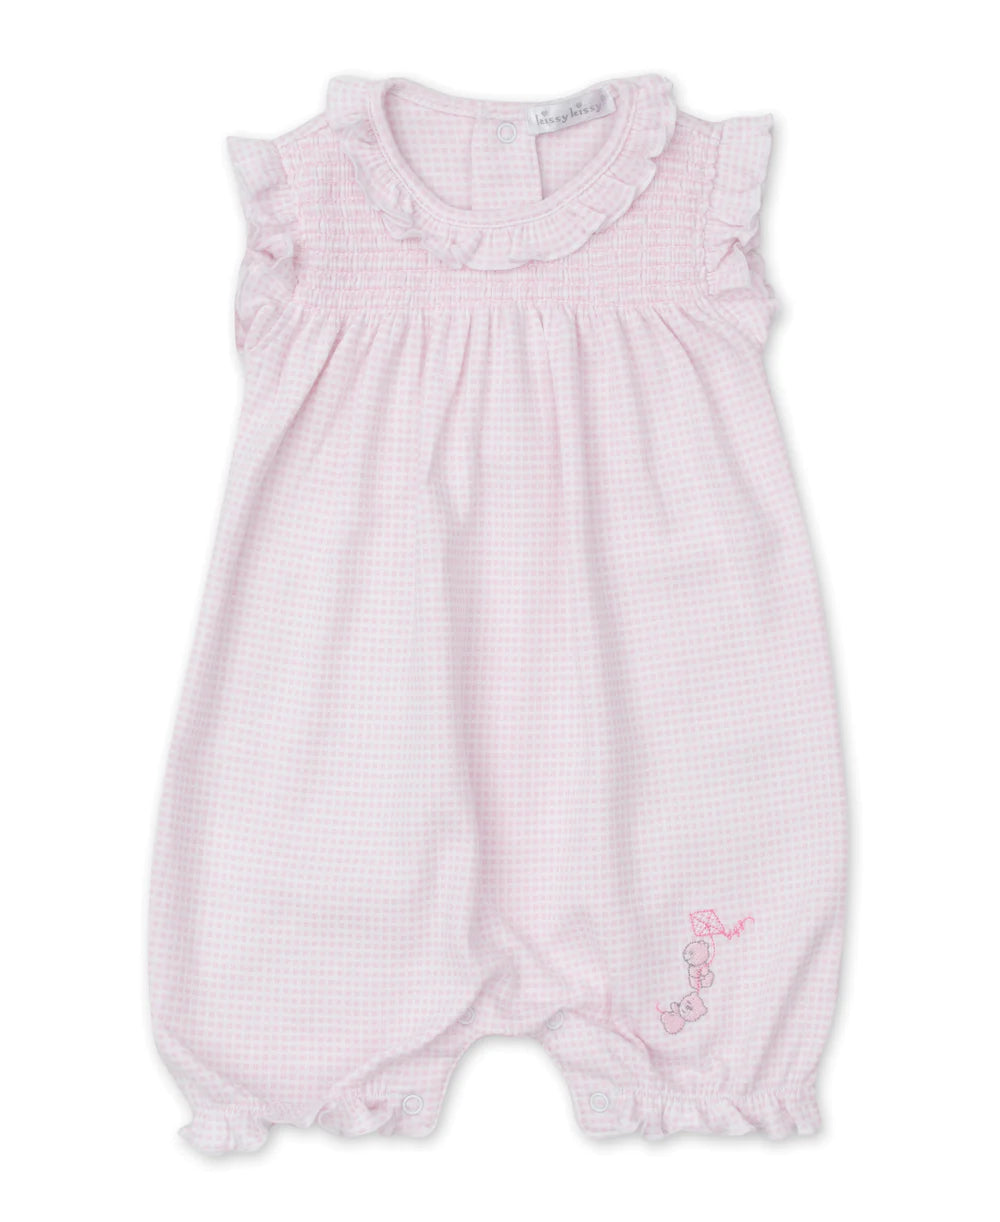 Beary Nice Kites Short Playsuit in Pink - Madison's Niche 